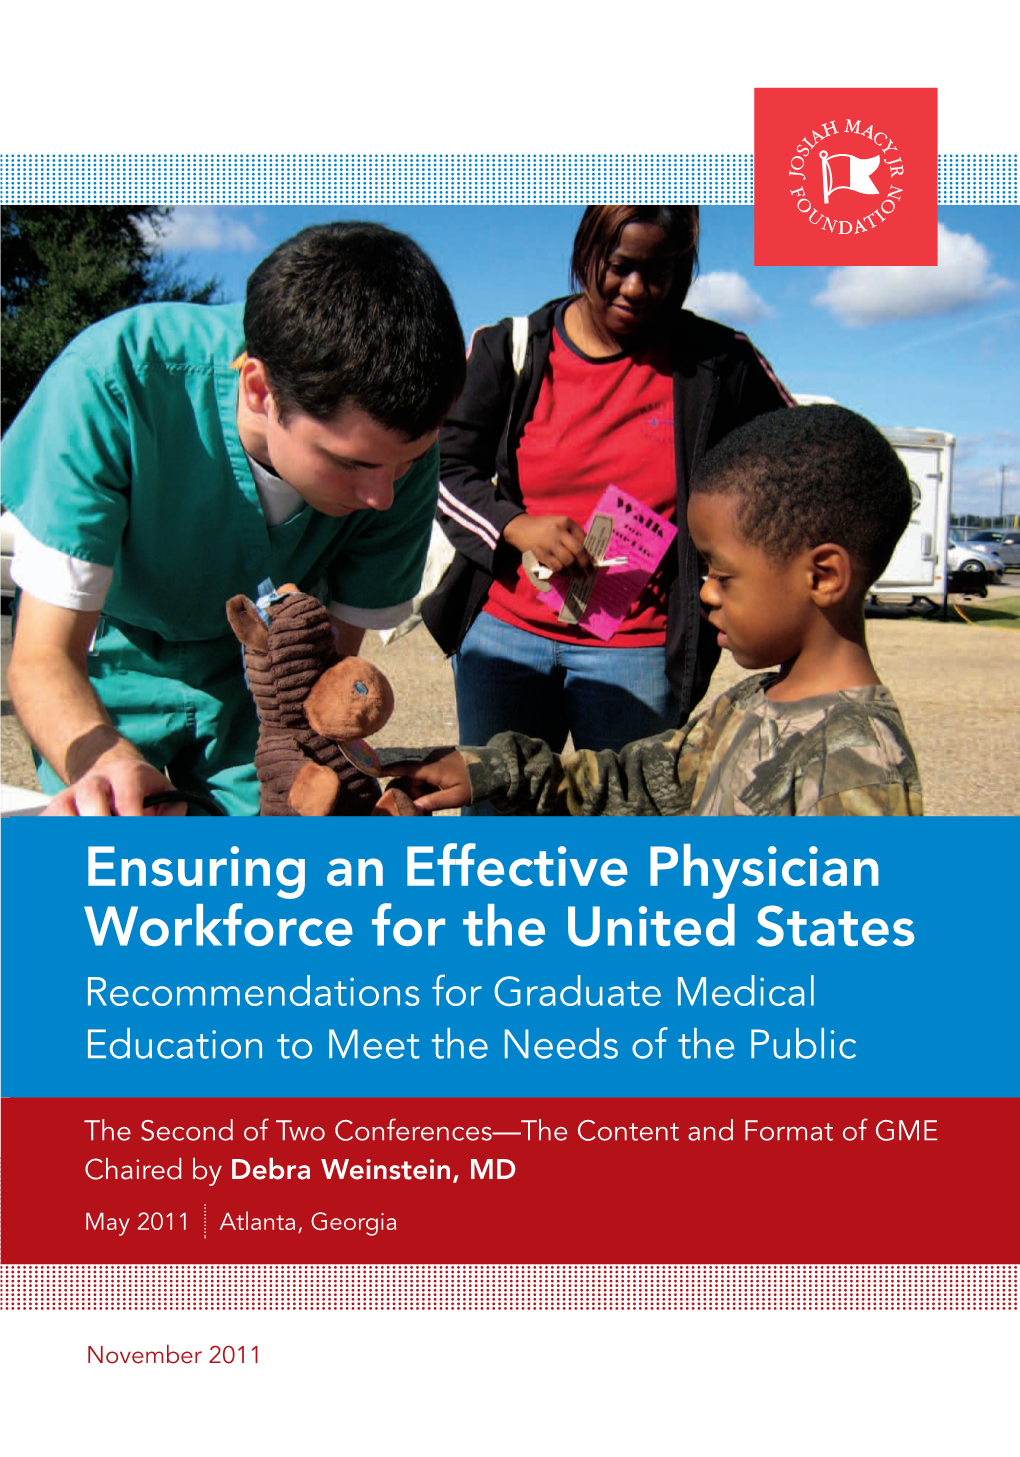 Ensuring an Effective Physician Workforce for the United States Recommendations for Graduate Medical Education to Meet the Needs of the Public